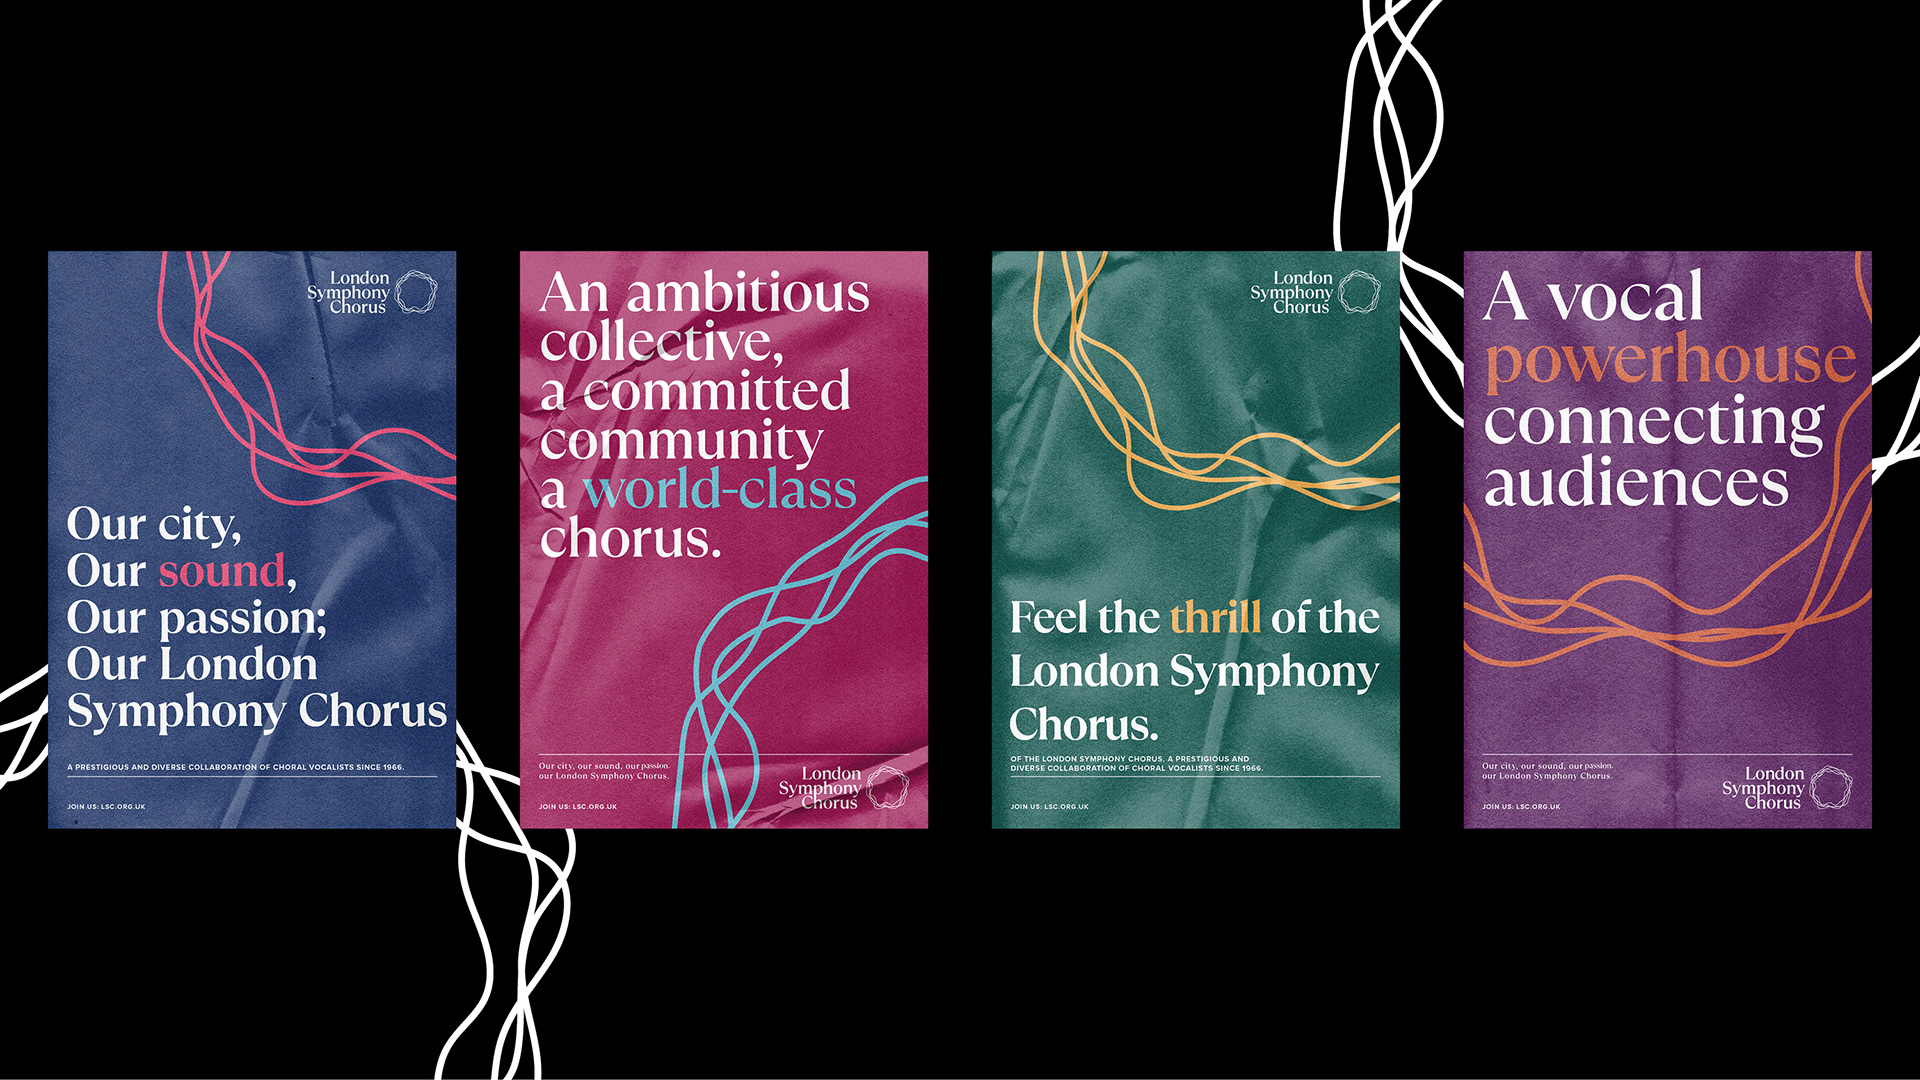 Two Stories Rebrand London Symphony Chorus to Reflect Its Future Facing Vision